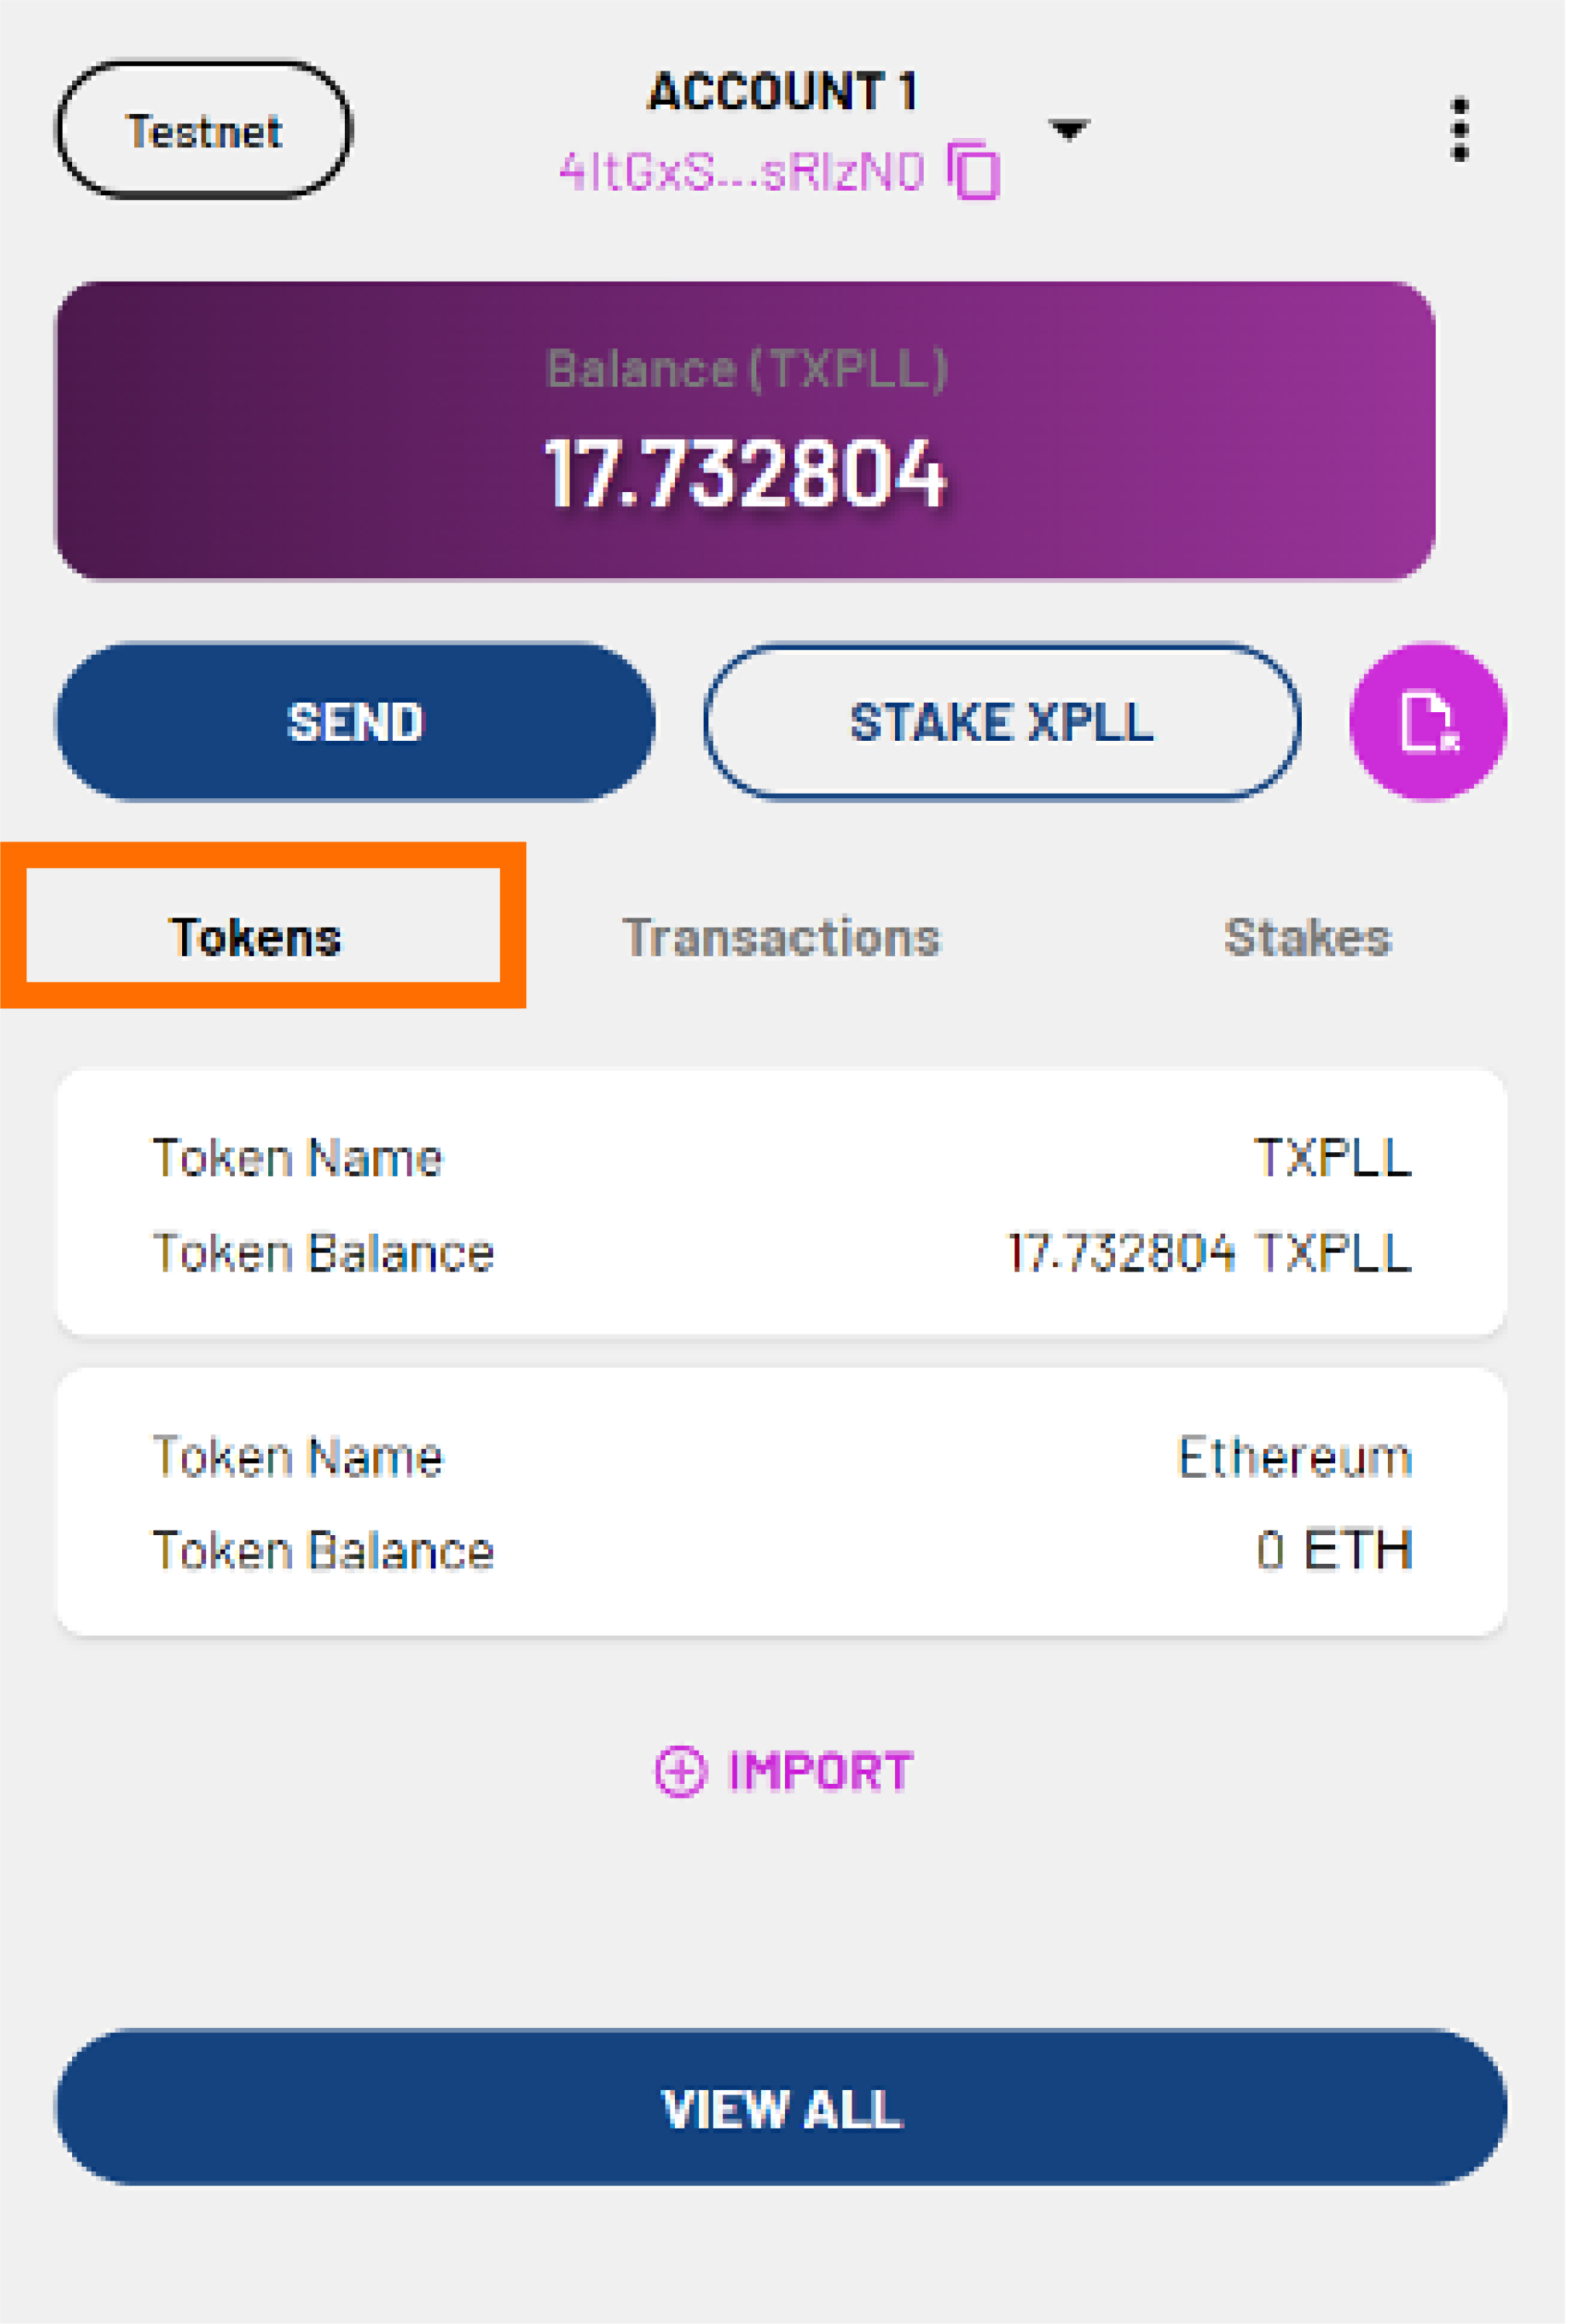 import tokens